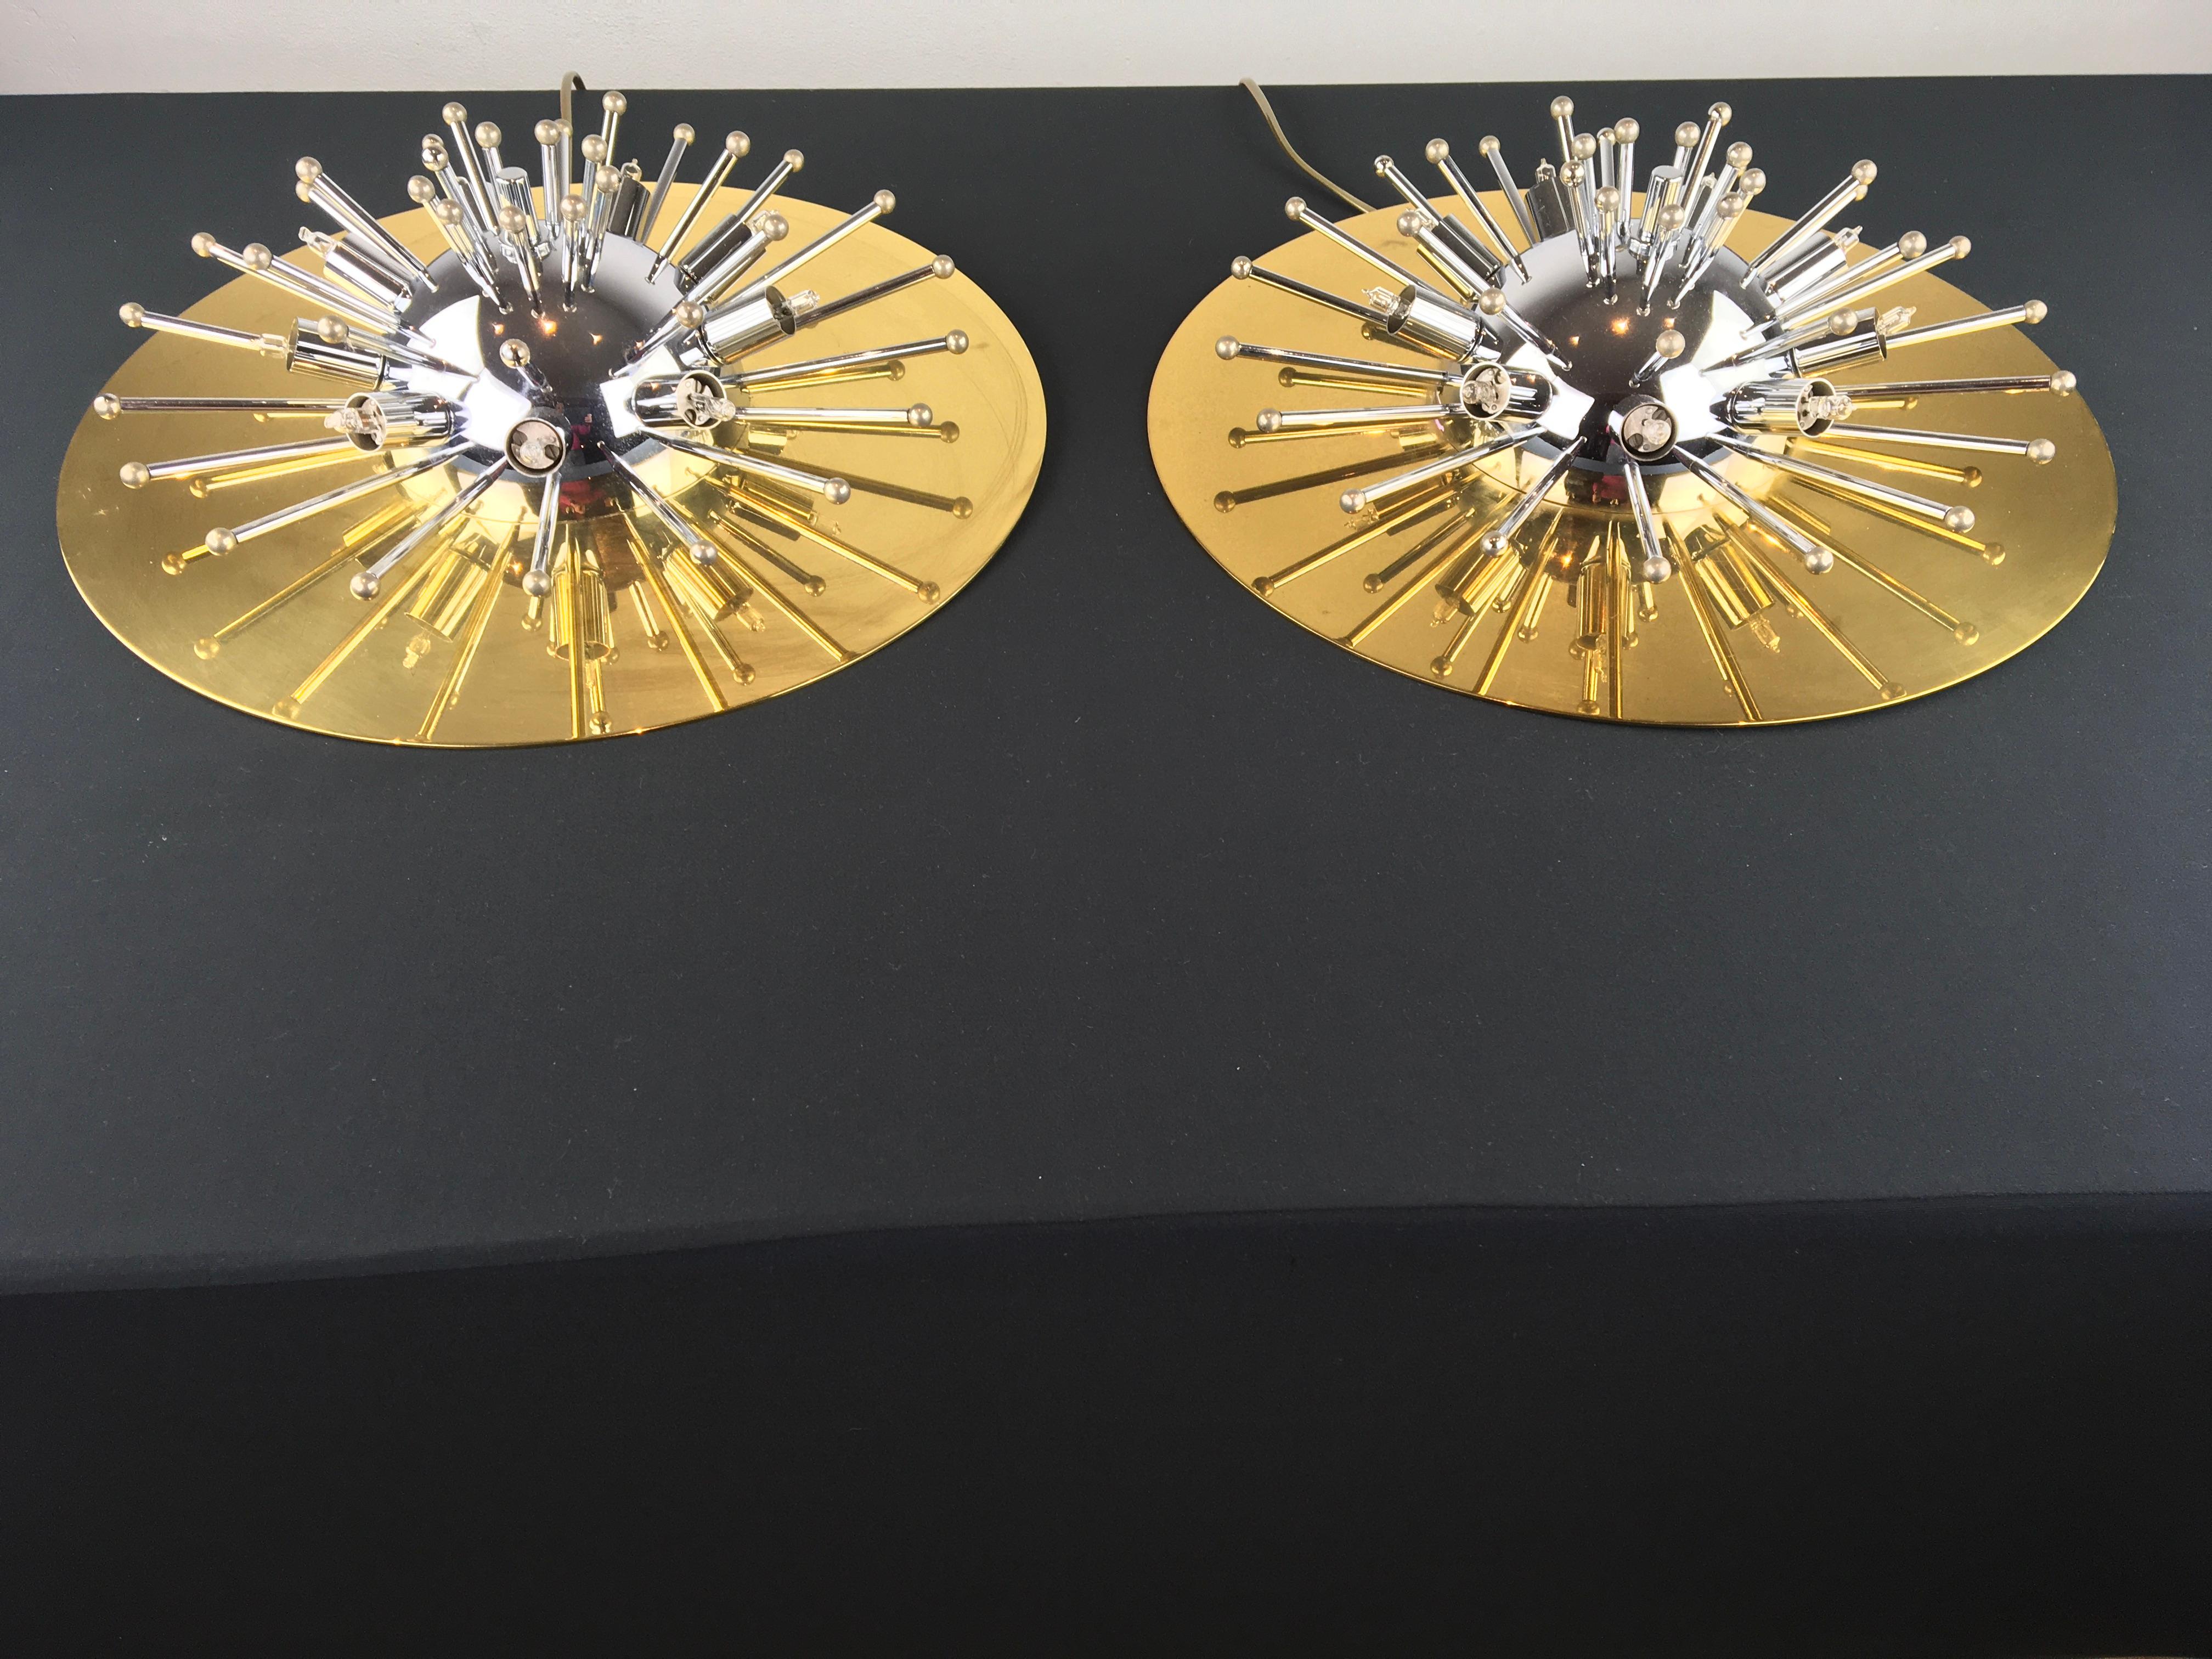 Pair of Sputnik wall lights or flushmounts.
These Space Age lighting have a heavy brass round base with chromed sputnik details all over. These half sputnik scones look great! 
They have each 9 insert light points, 18 big, 9 medium and 9 small